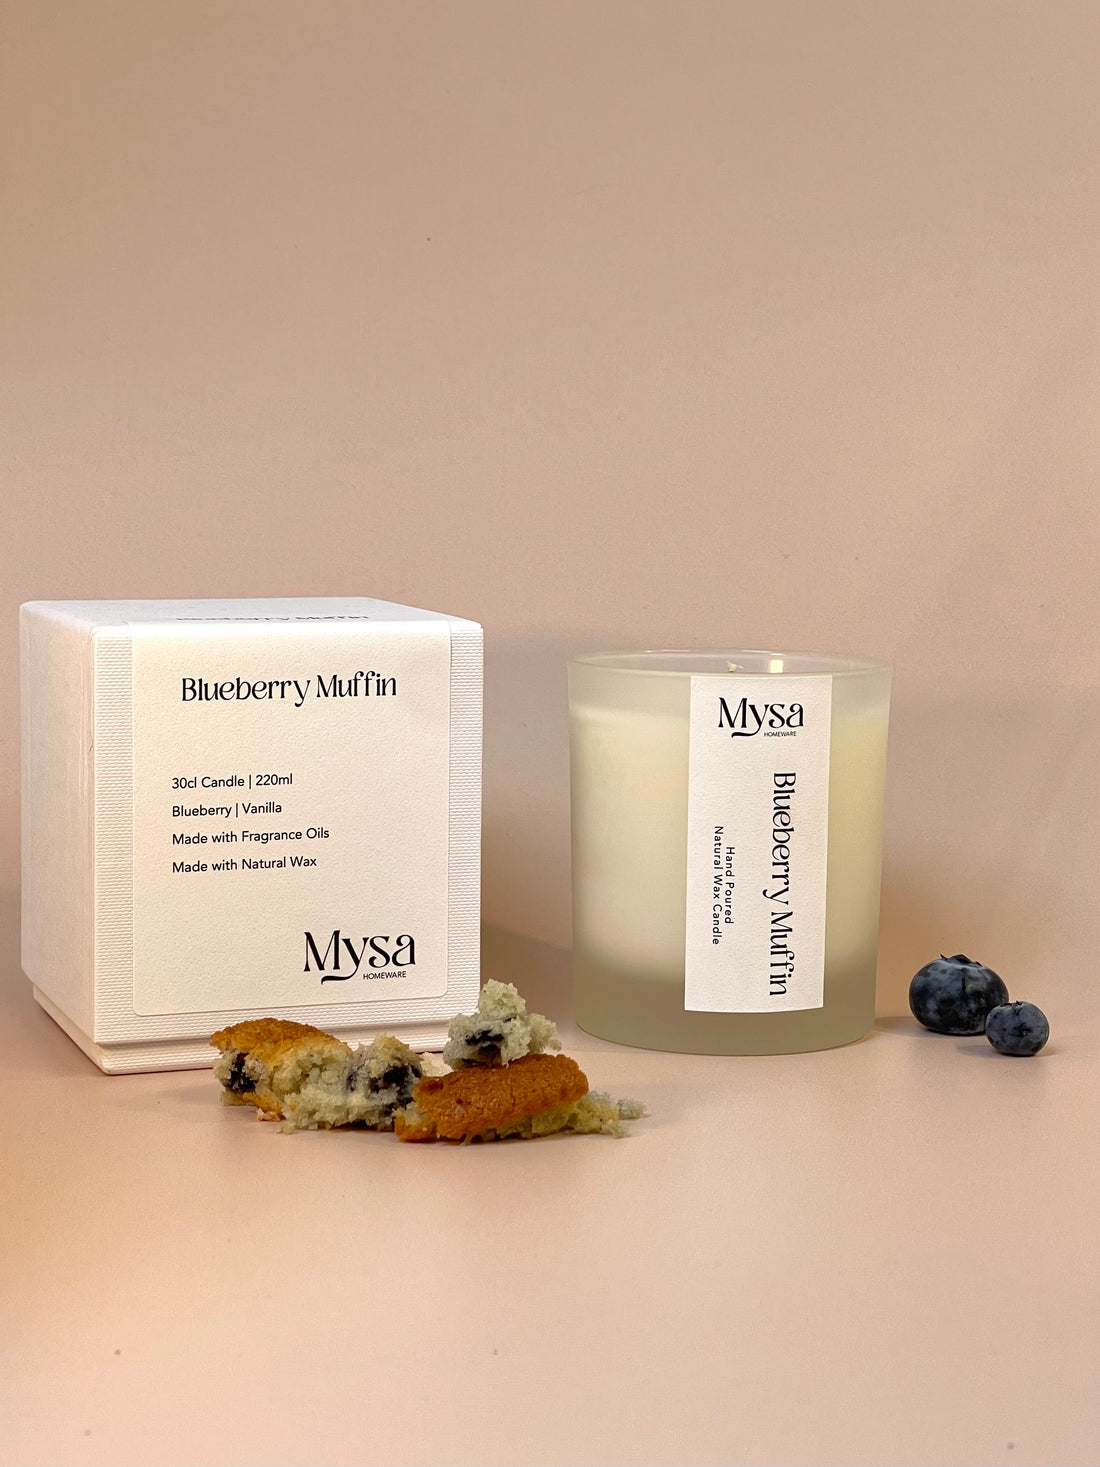 Blueberry Muffin luxury scented candle in gift box, with natural wax and blueberry and vanilla fragrance.